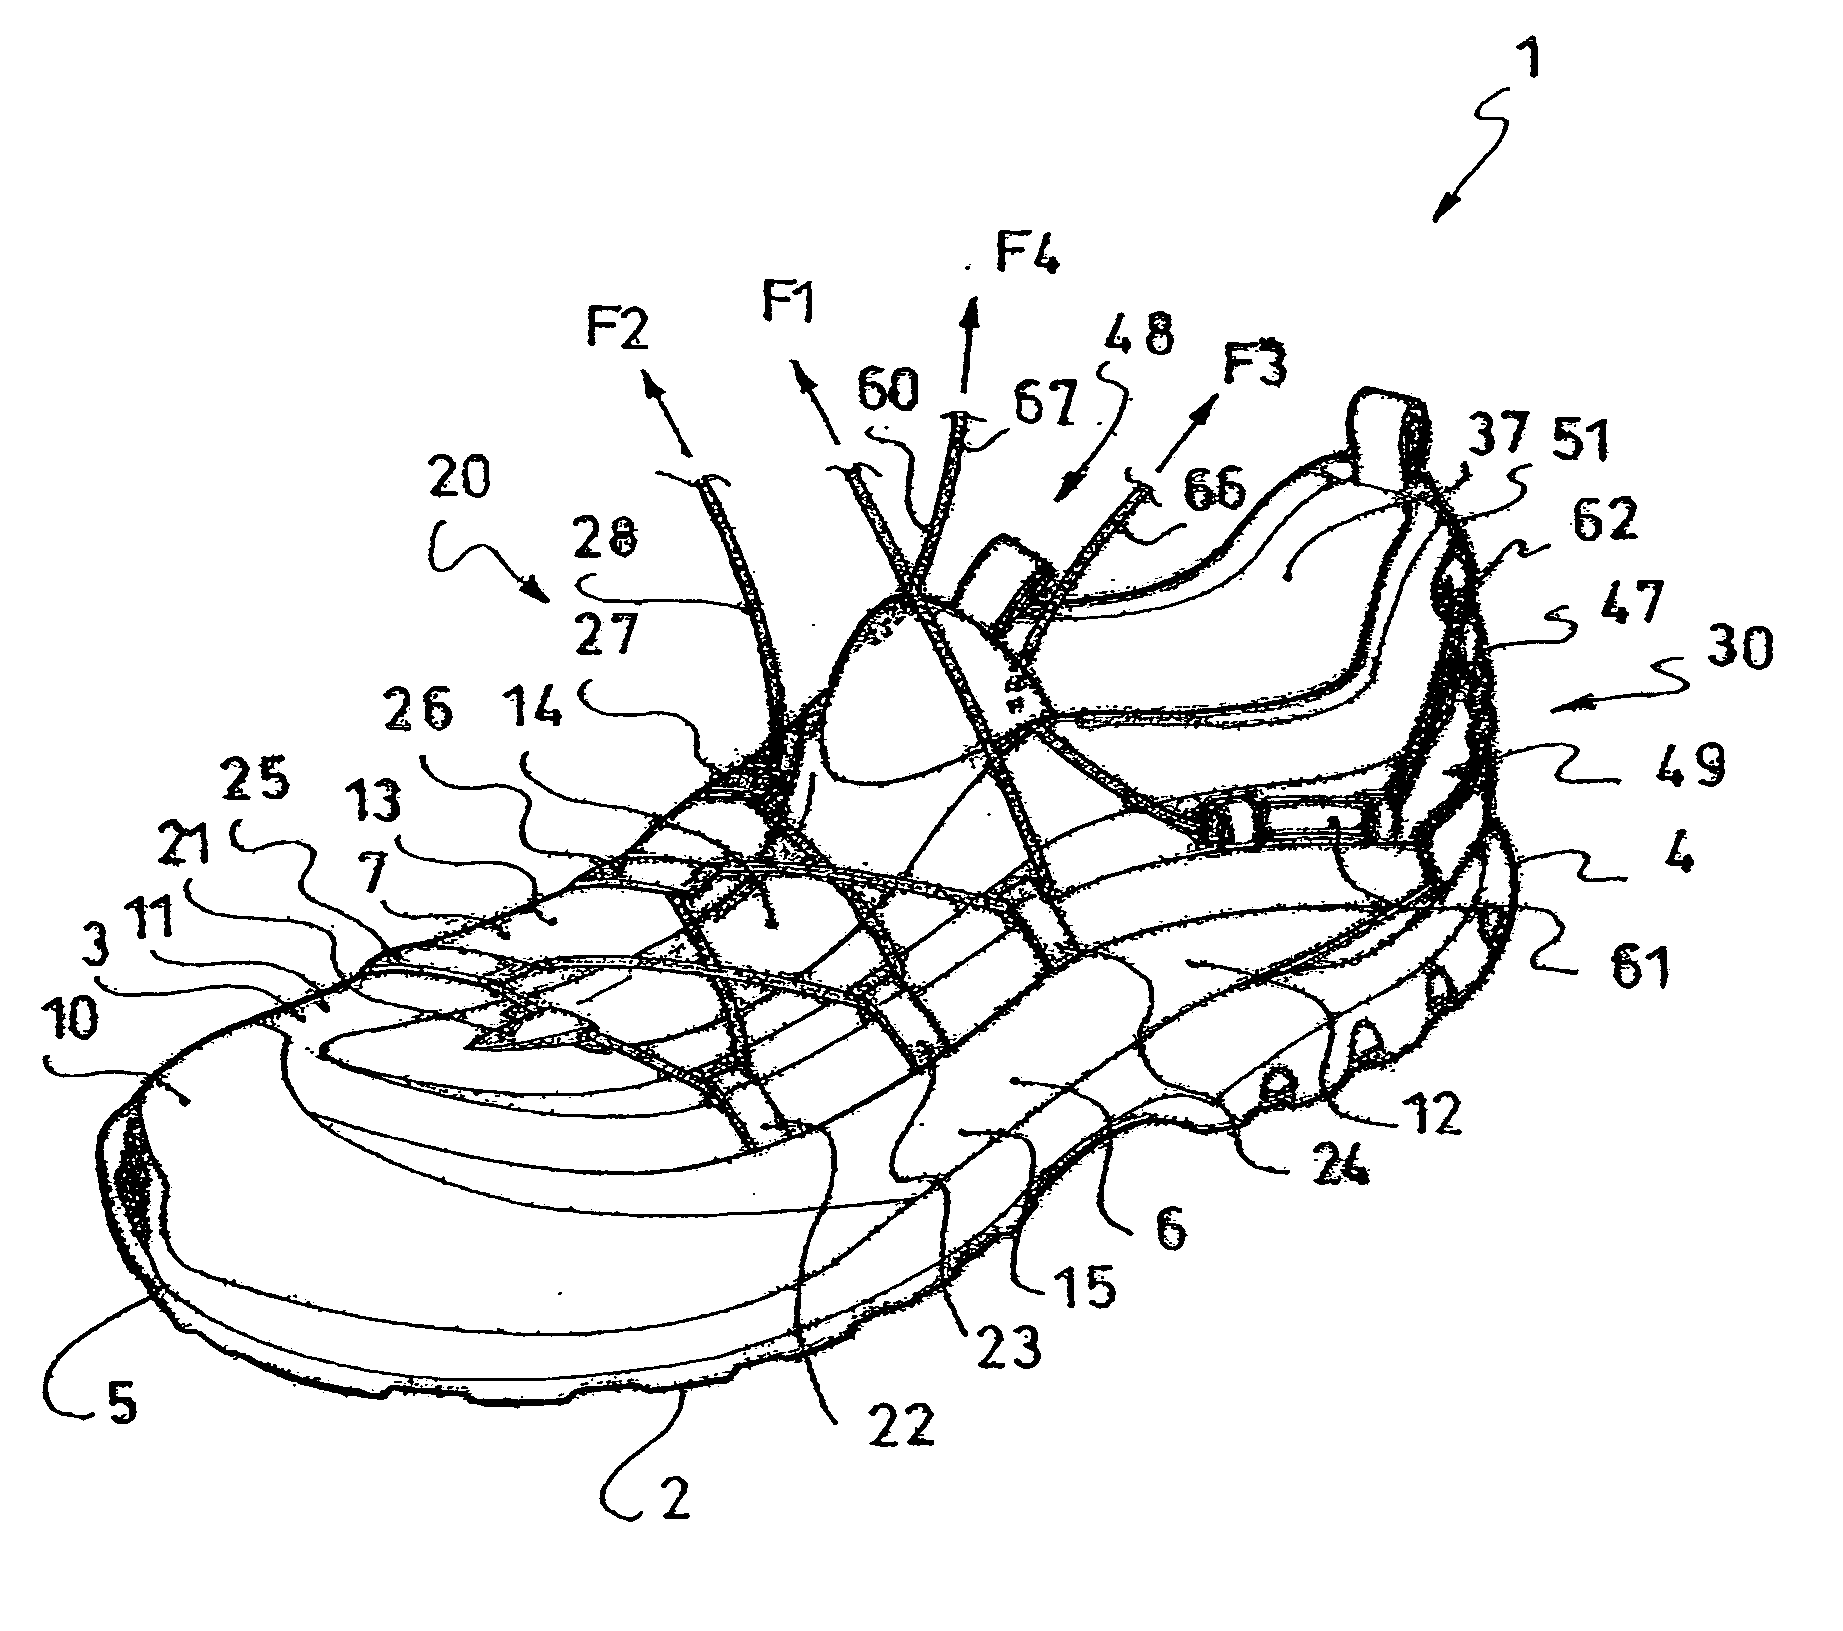 Footwear with improved heel support